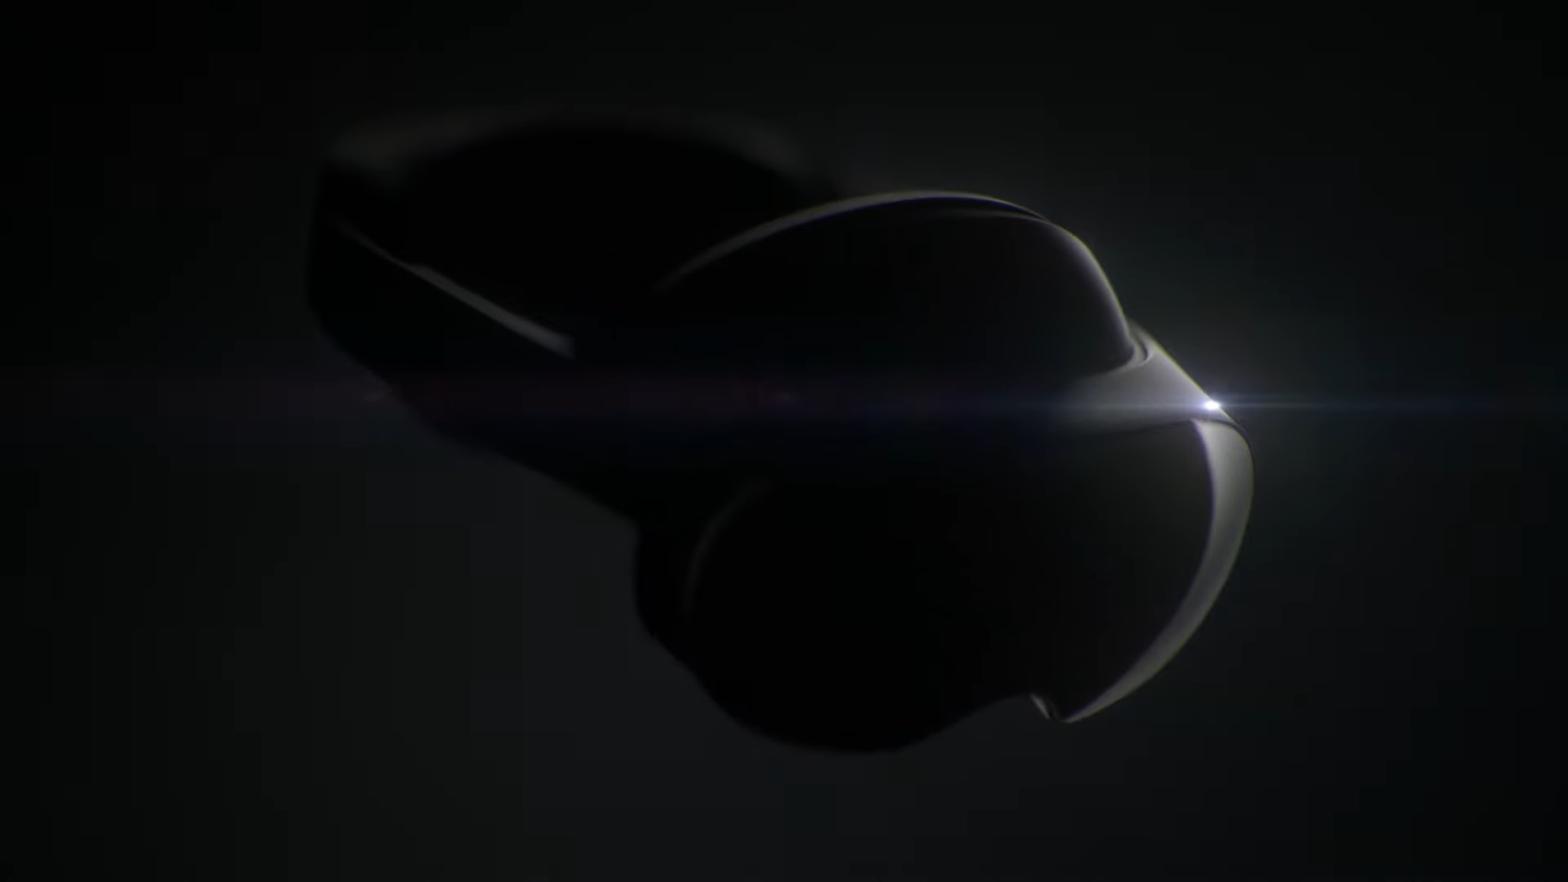 A black headset in front of a black background with some light shining on it from the right side